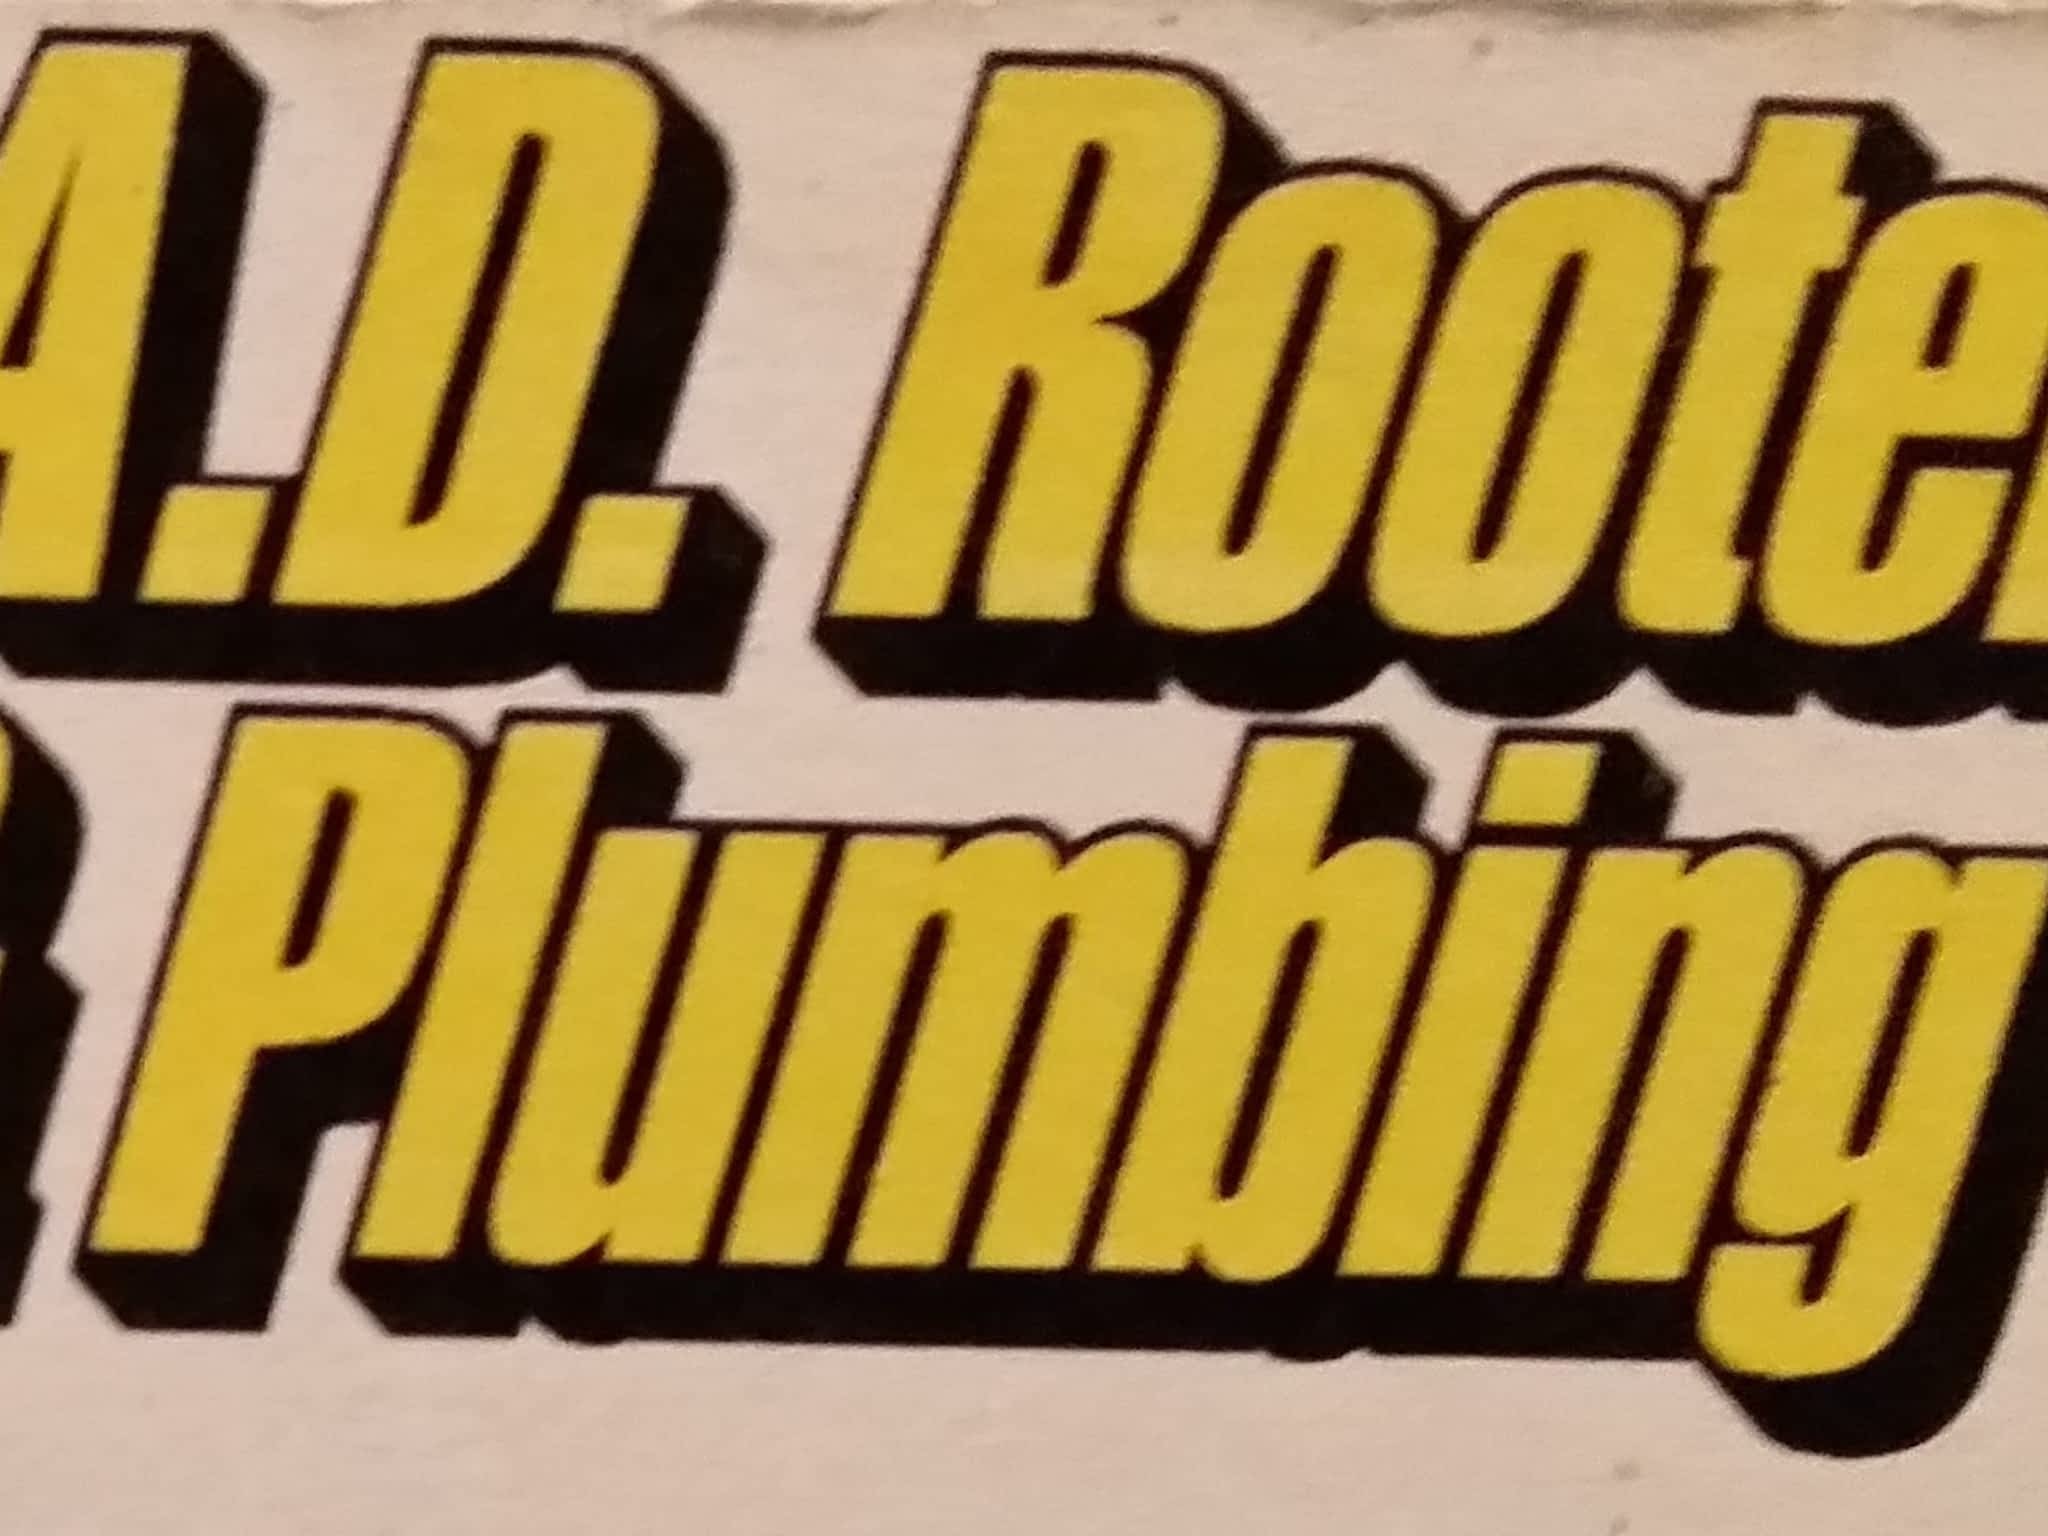 photo A D Rooter & Plumbing